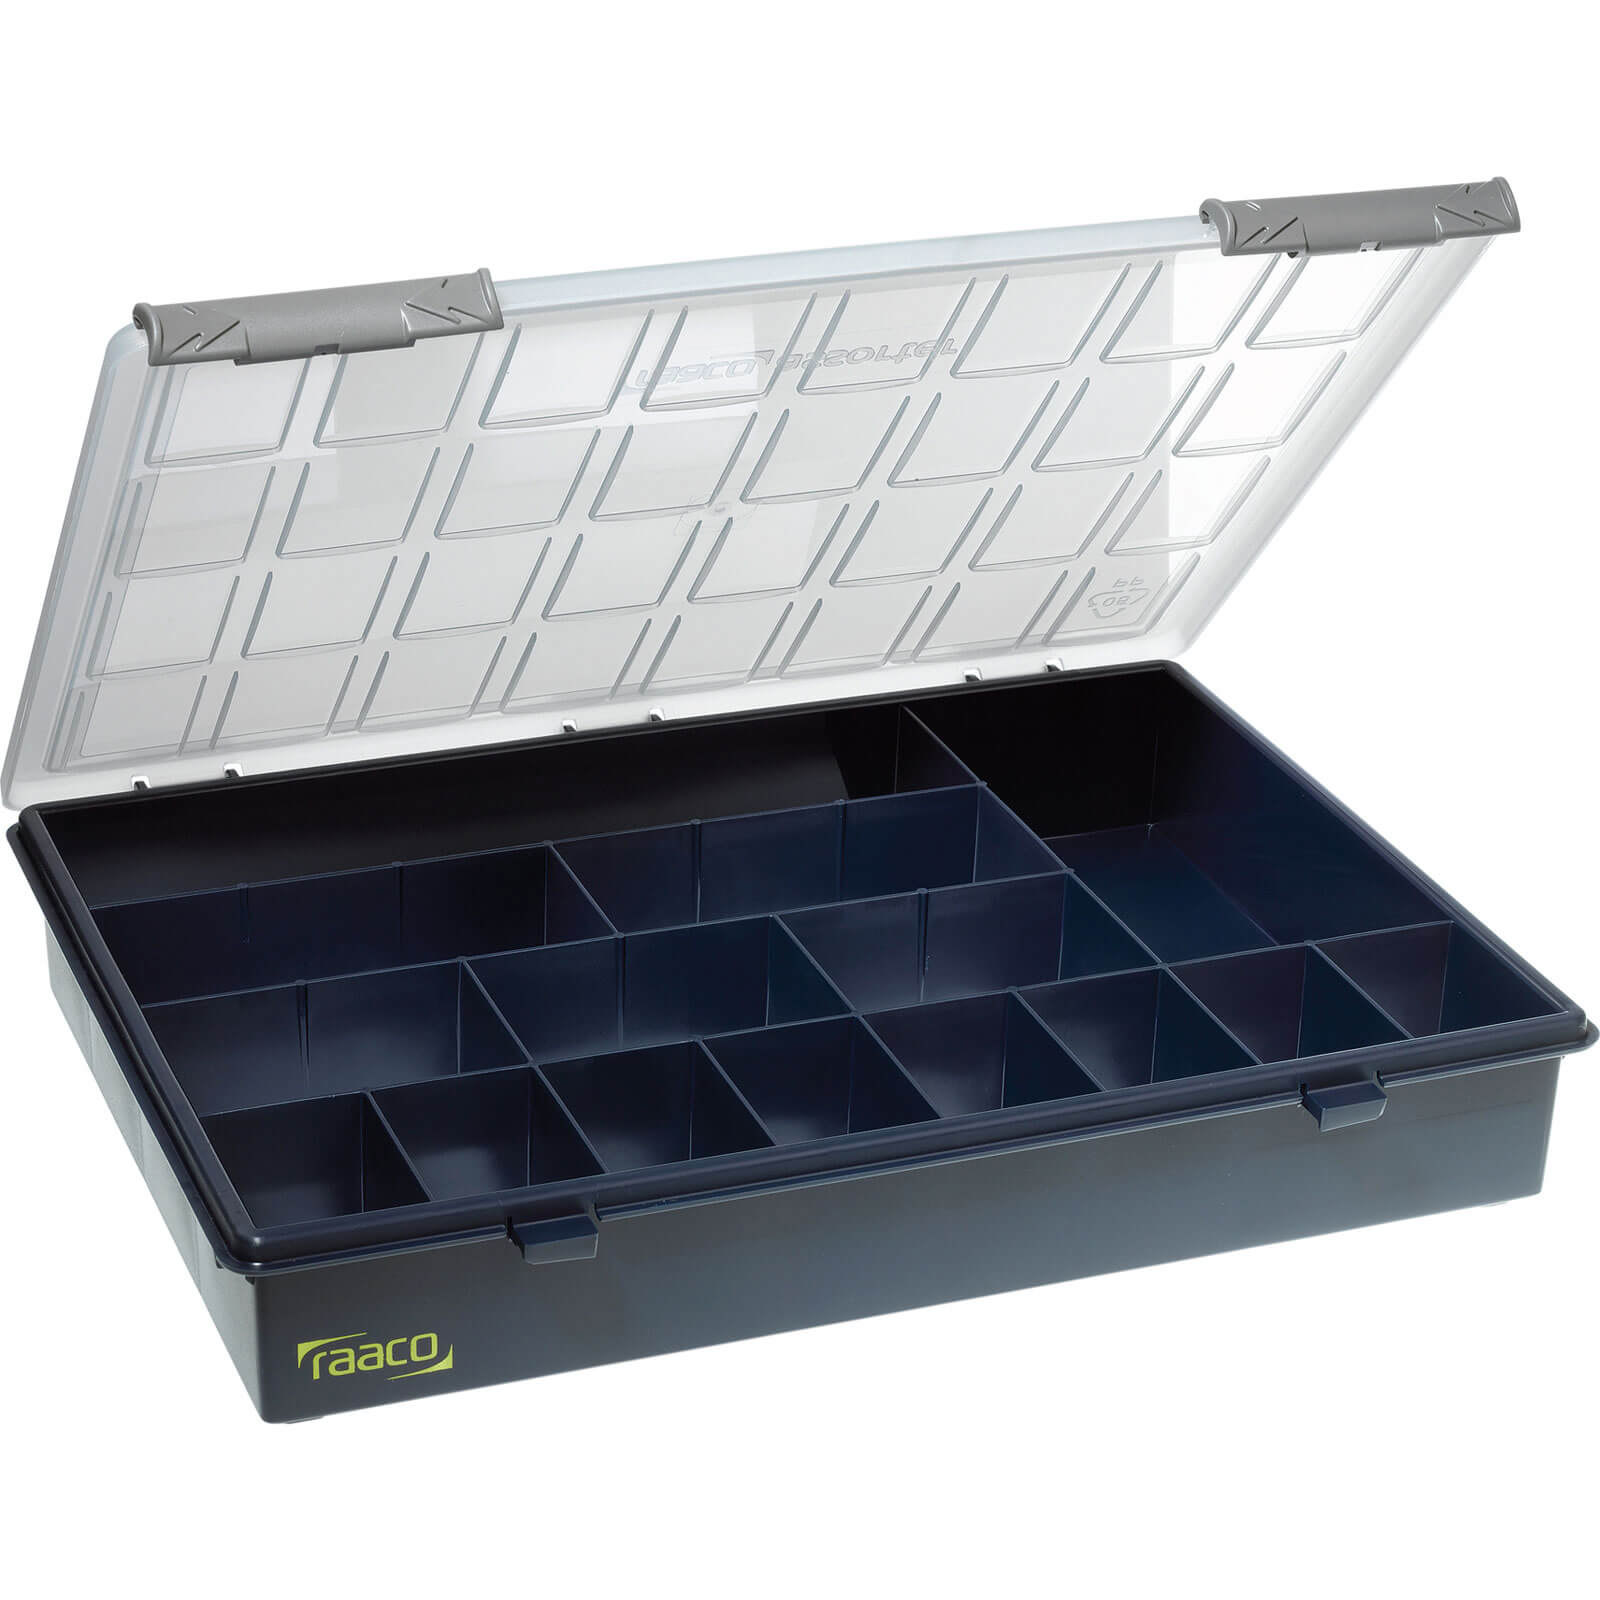 Image of Raaco 15 Compartment A4 Organiser Case